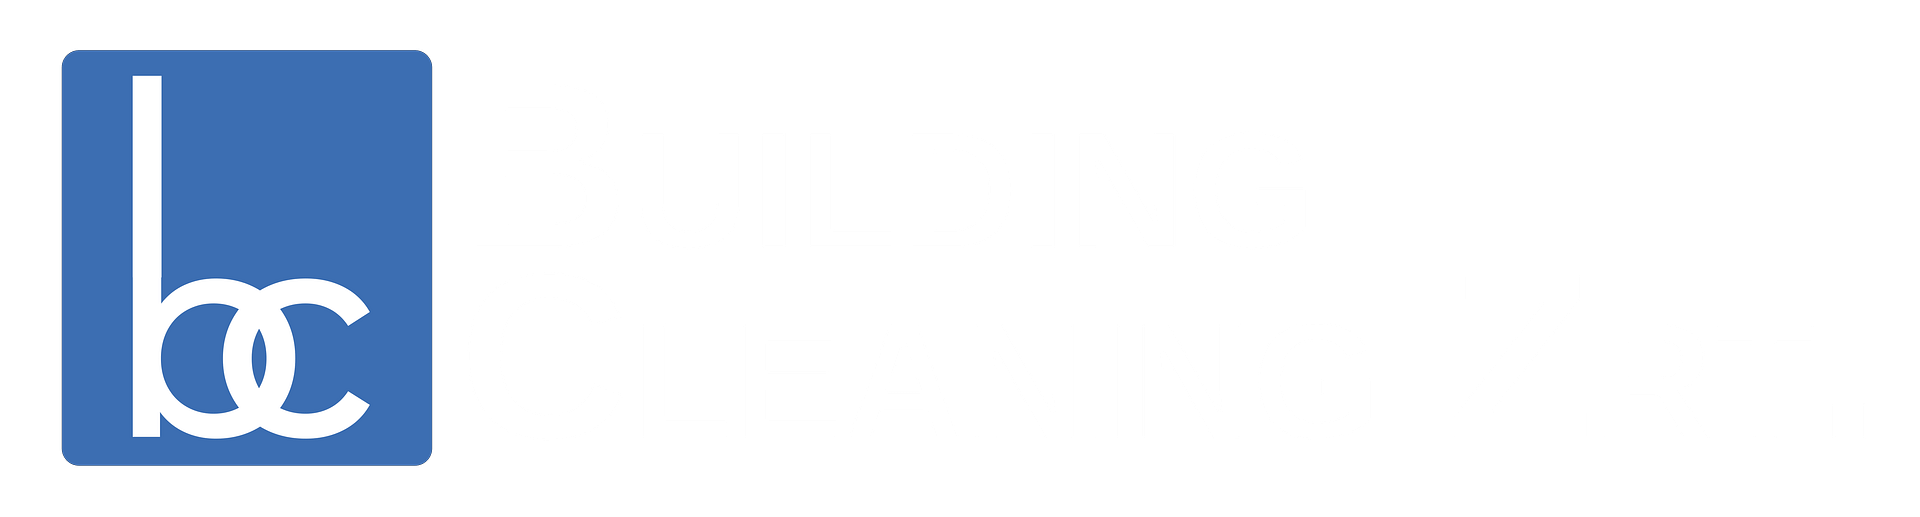 Building Cleaning Zrt.